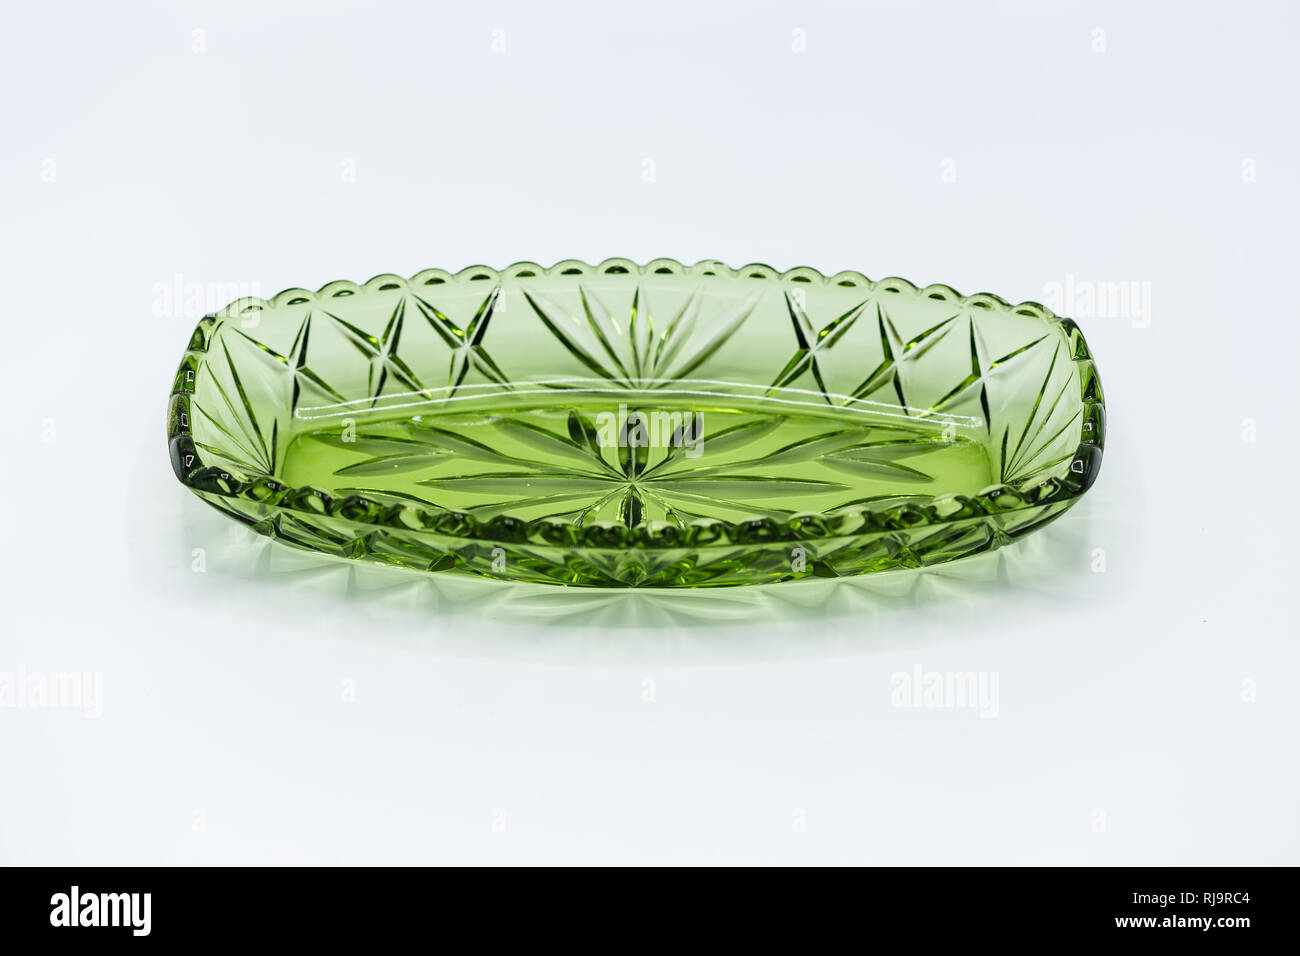 a green glass relish tray or candy dish Stock Photo